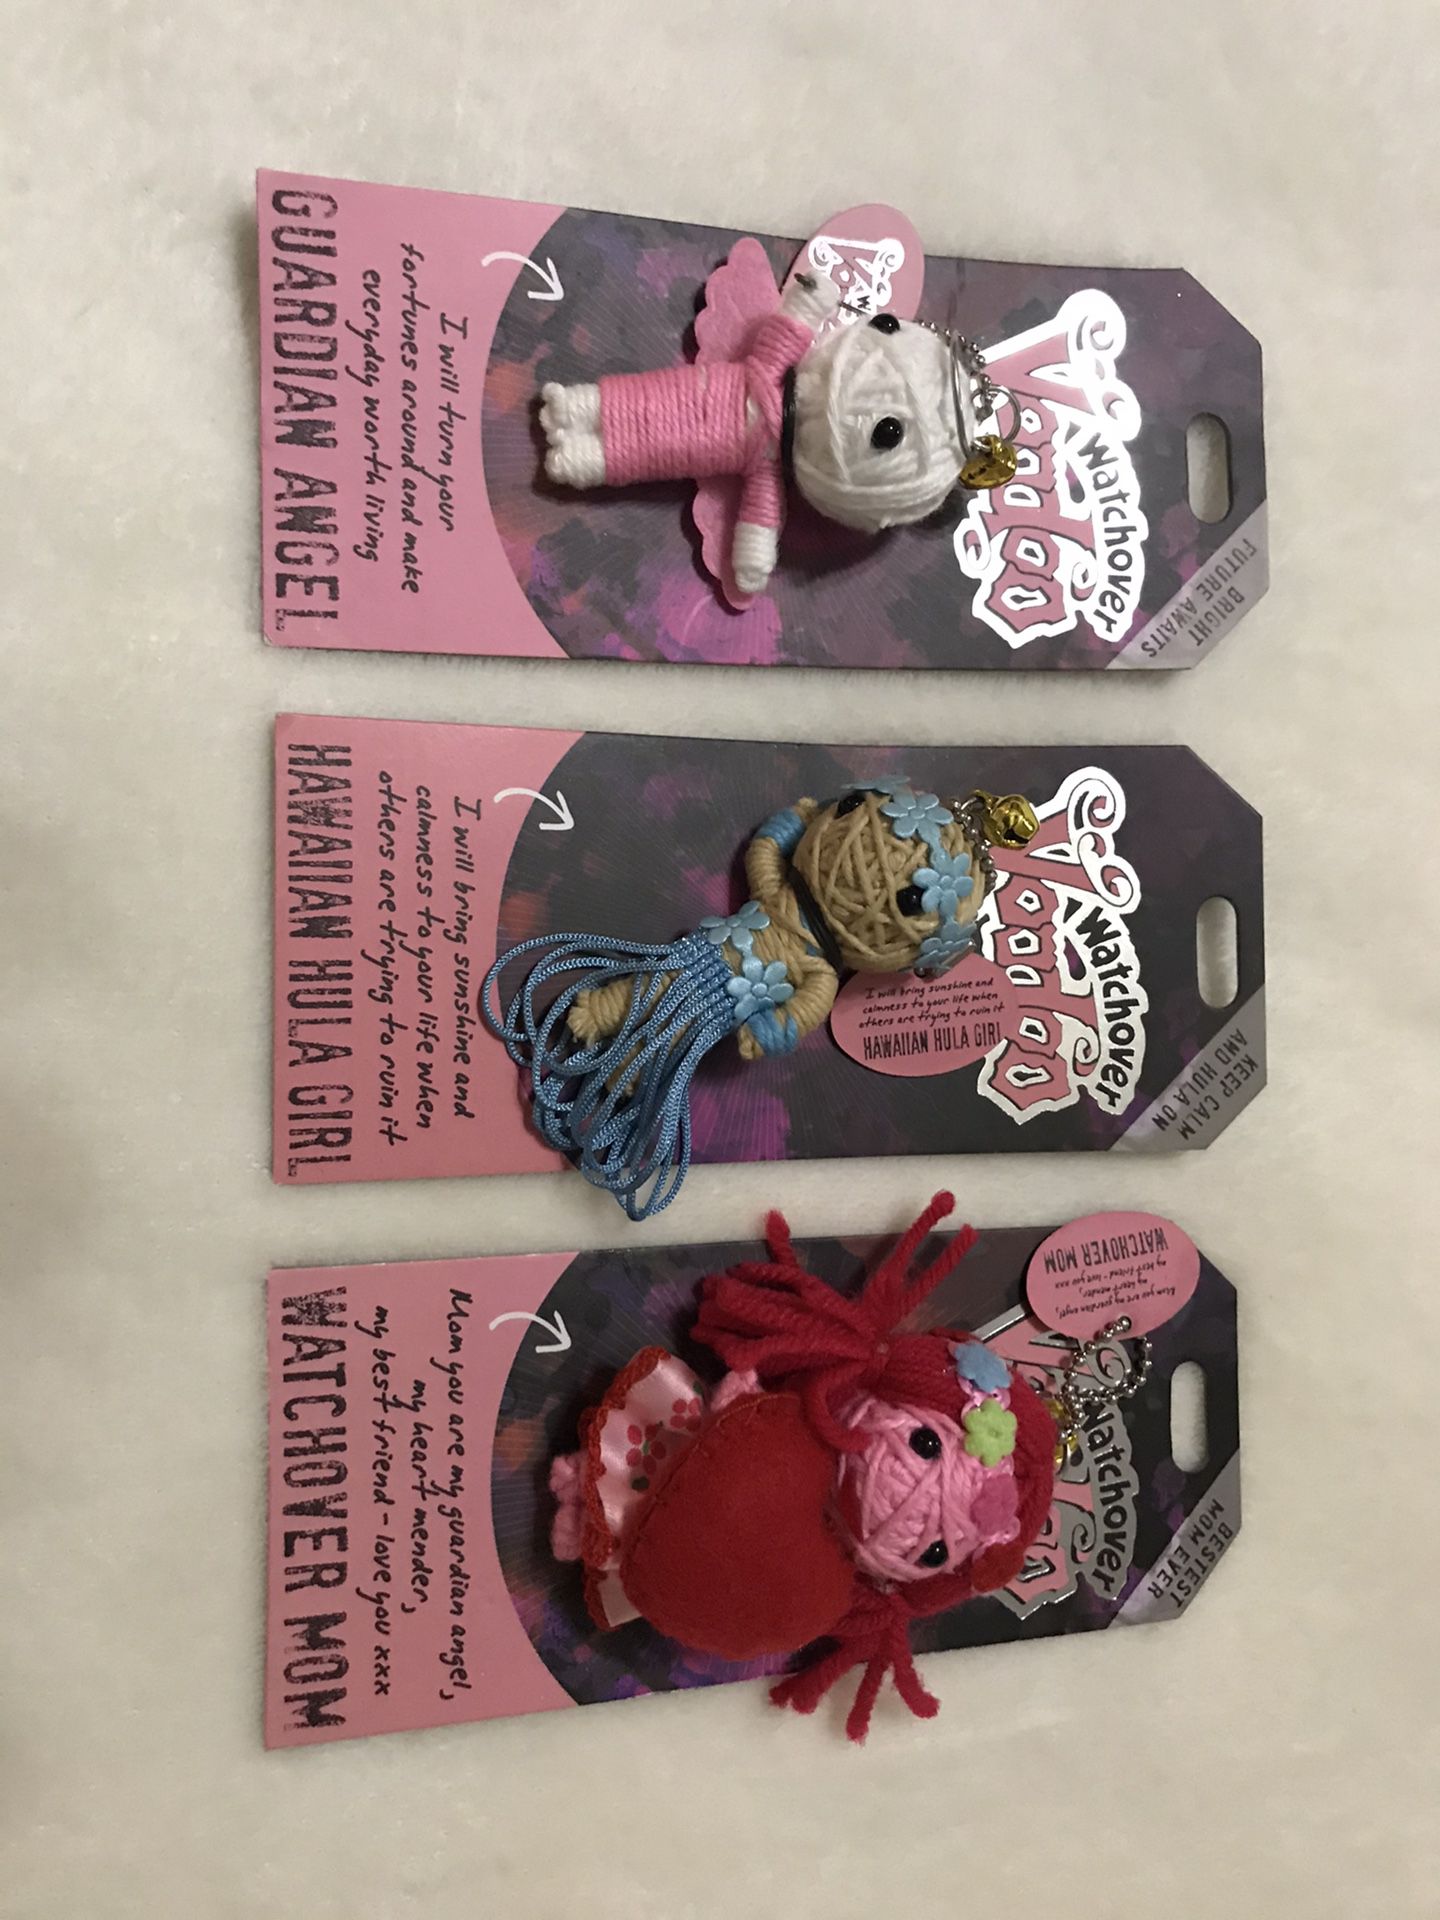 Troll Dolls, Each With Inspirational Message. I Know Somebody Out There Needs Troll Dolls. It’s A Steal Compared To What Cash I Spent For Them.